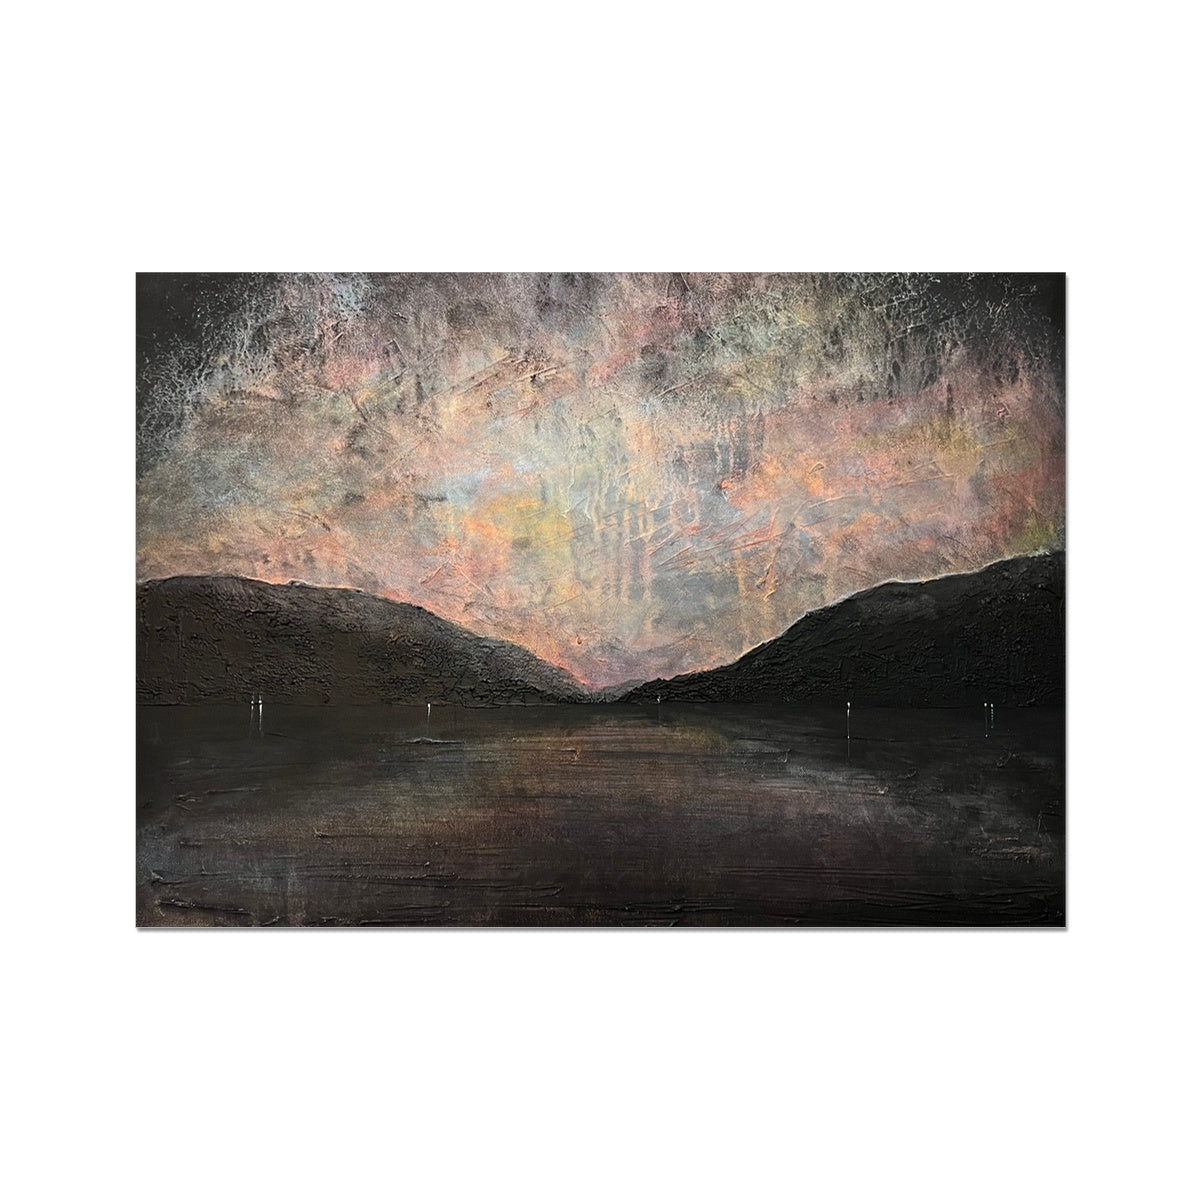 A Brooding Loch Lomond Painting | Fine Art Prints From Scotland-Unframed Prints-Scottish Lochs & Mountains Art Gallery-A2 Landscape-Paintings, Prints, Homeware, Art Gifts From Scotland By Scottish Artist Kevin Hunter